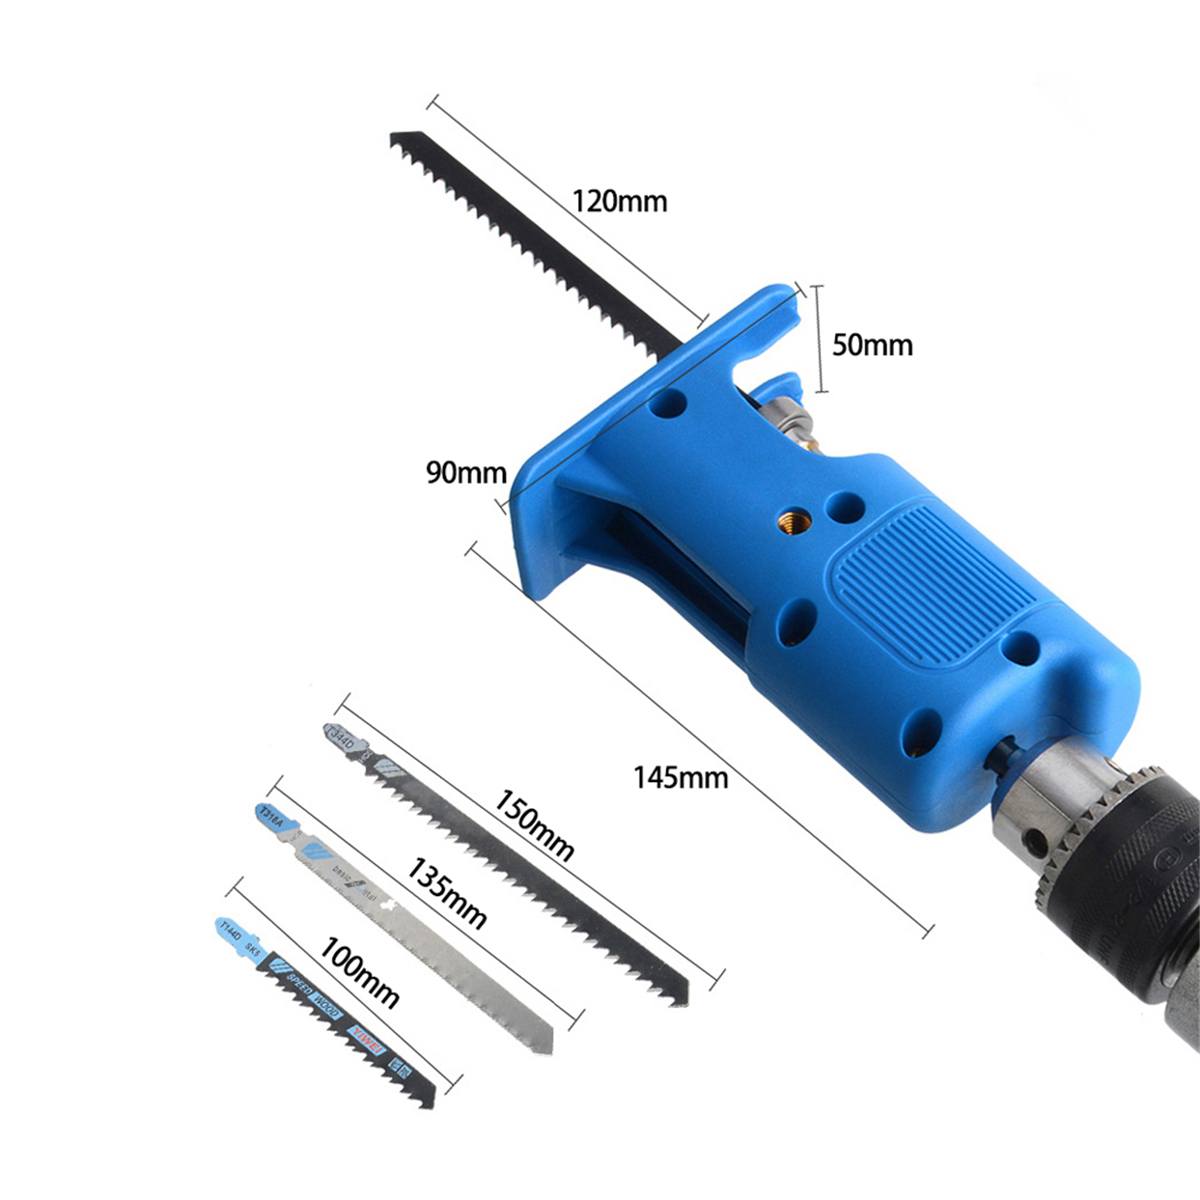 Drillpro-Reciprocating-Saw-Attachment-Adapter-Change-Electric-Drill-Into-Reciprocating-Saw-for-Wood--1711693-4